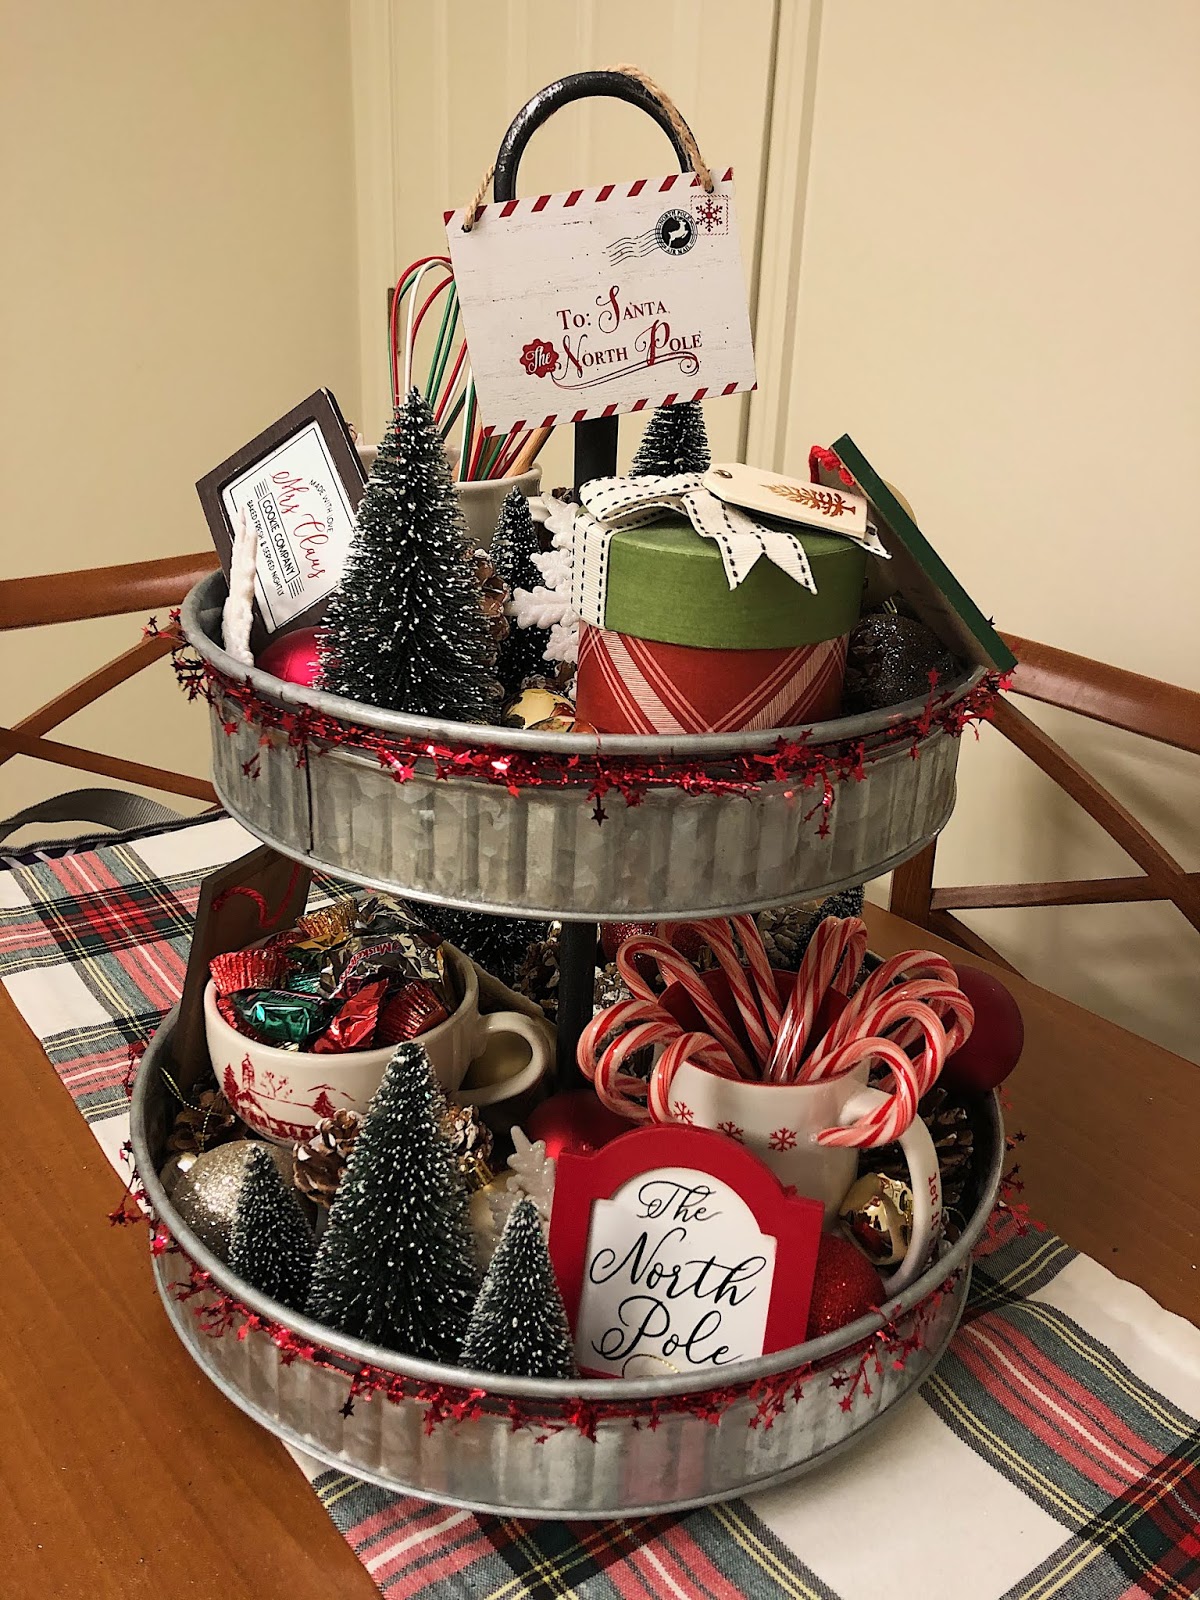 Decking Your Tiered Tray for Christmas - Shenandoah Sugar